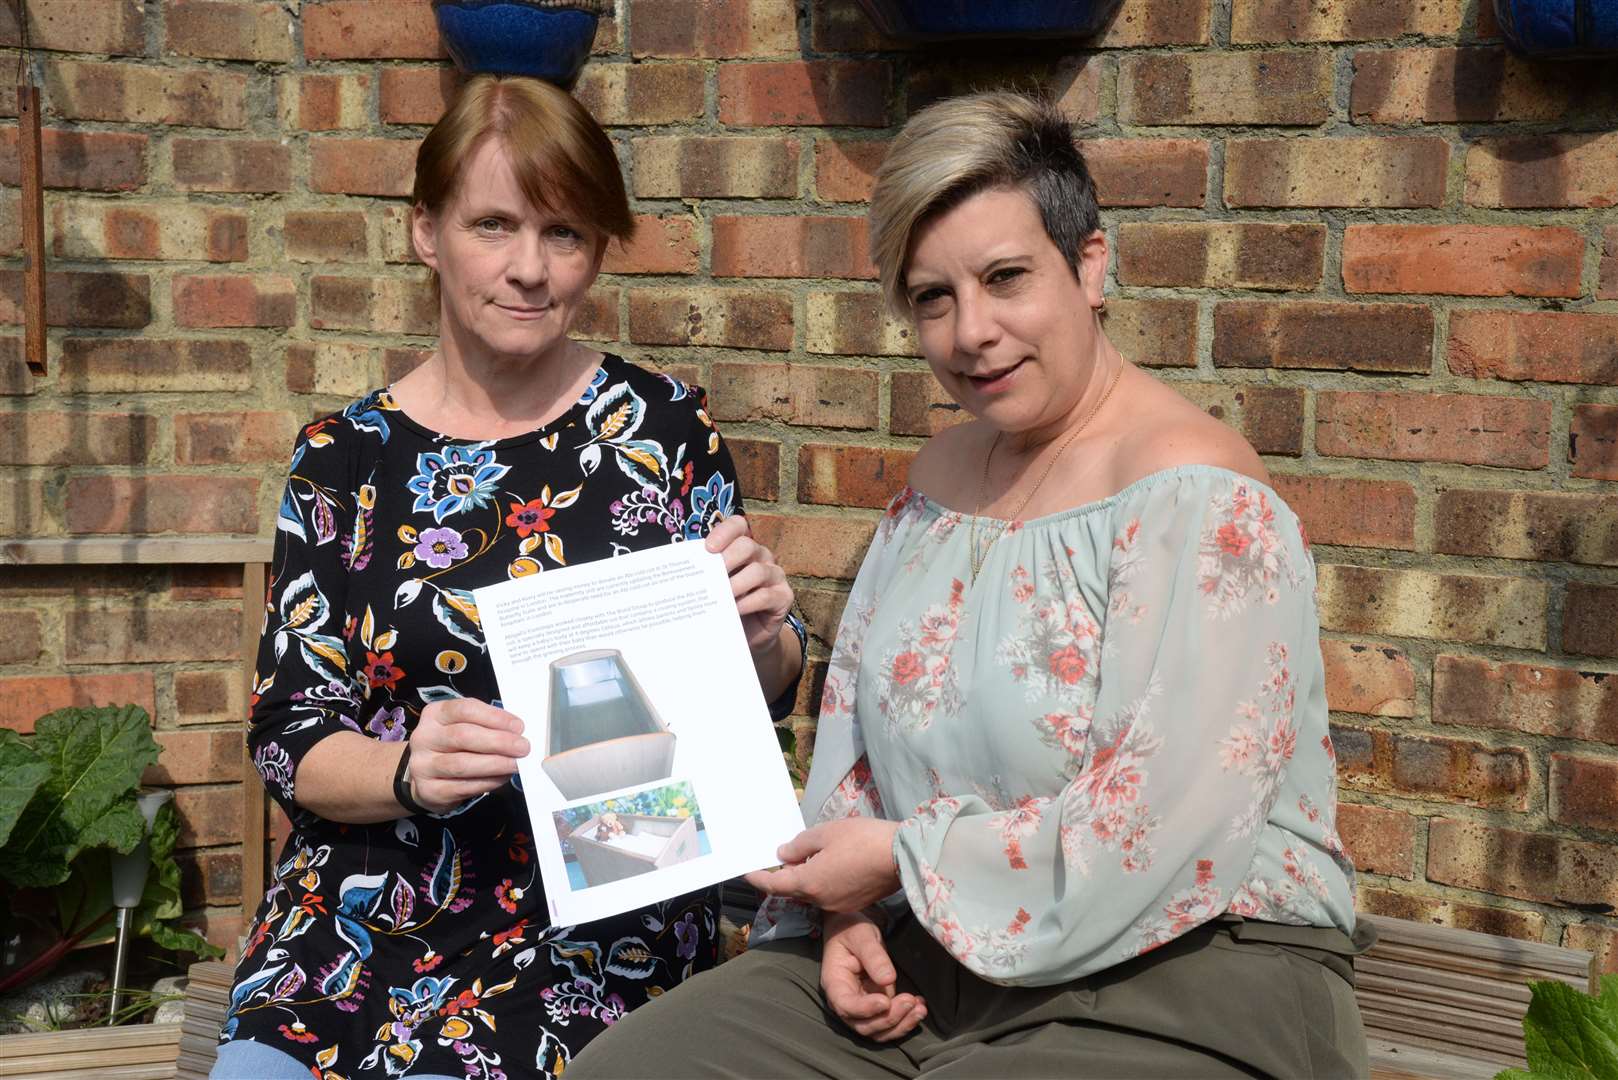 Vicky Smart and Kerry Parnell of Sittingbourne who are doing a skydive in aid of a charity that supplies cots for stillborn babies. Picture: Chris Davey